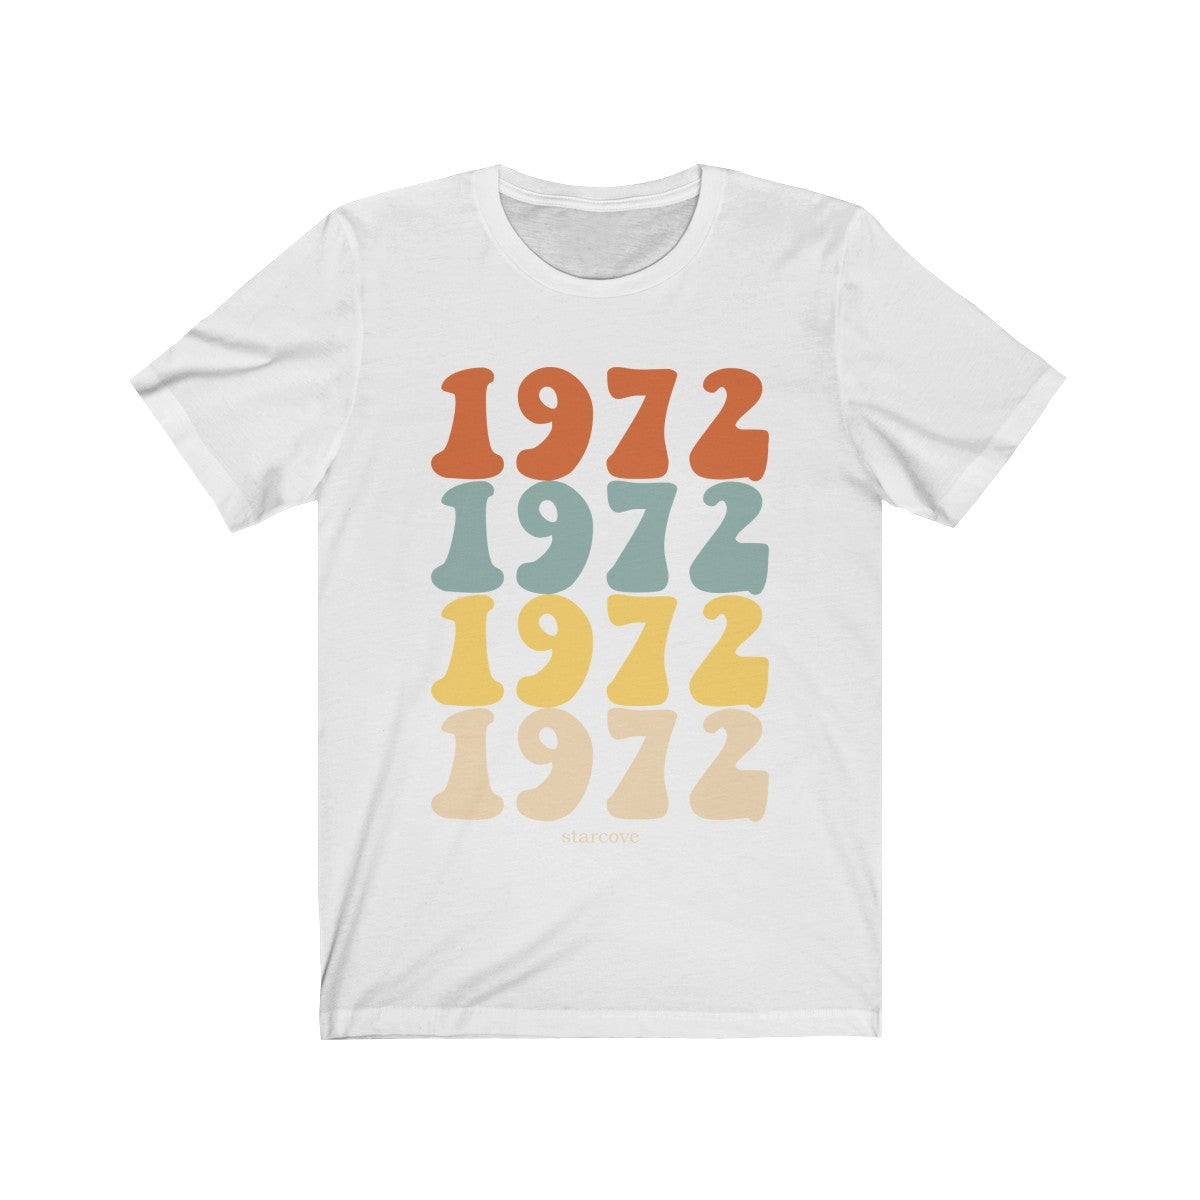 1972 shirt, 50th Birthday Party Turning 50 Years, 70s Retro Vintage gift Idea Women Men, Born Made in 1972 Funny Present TShirt Starcove Fashion